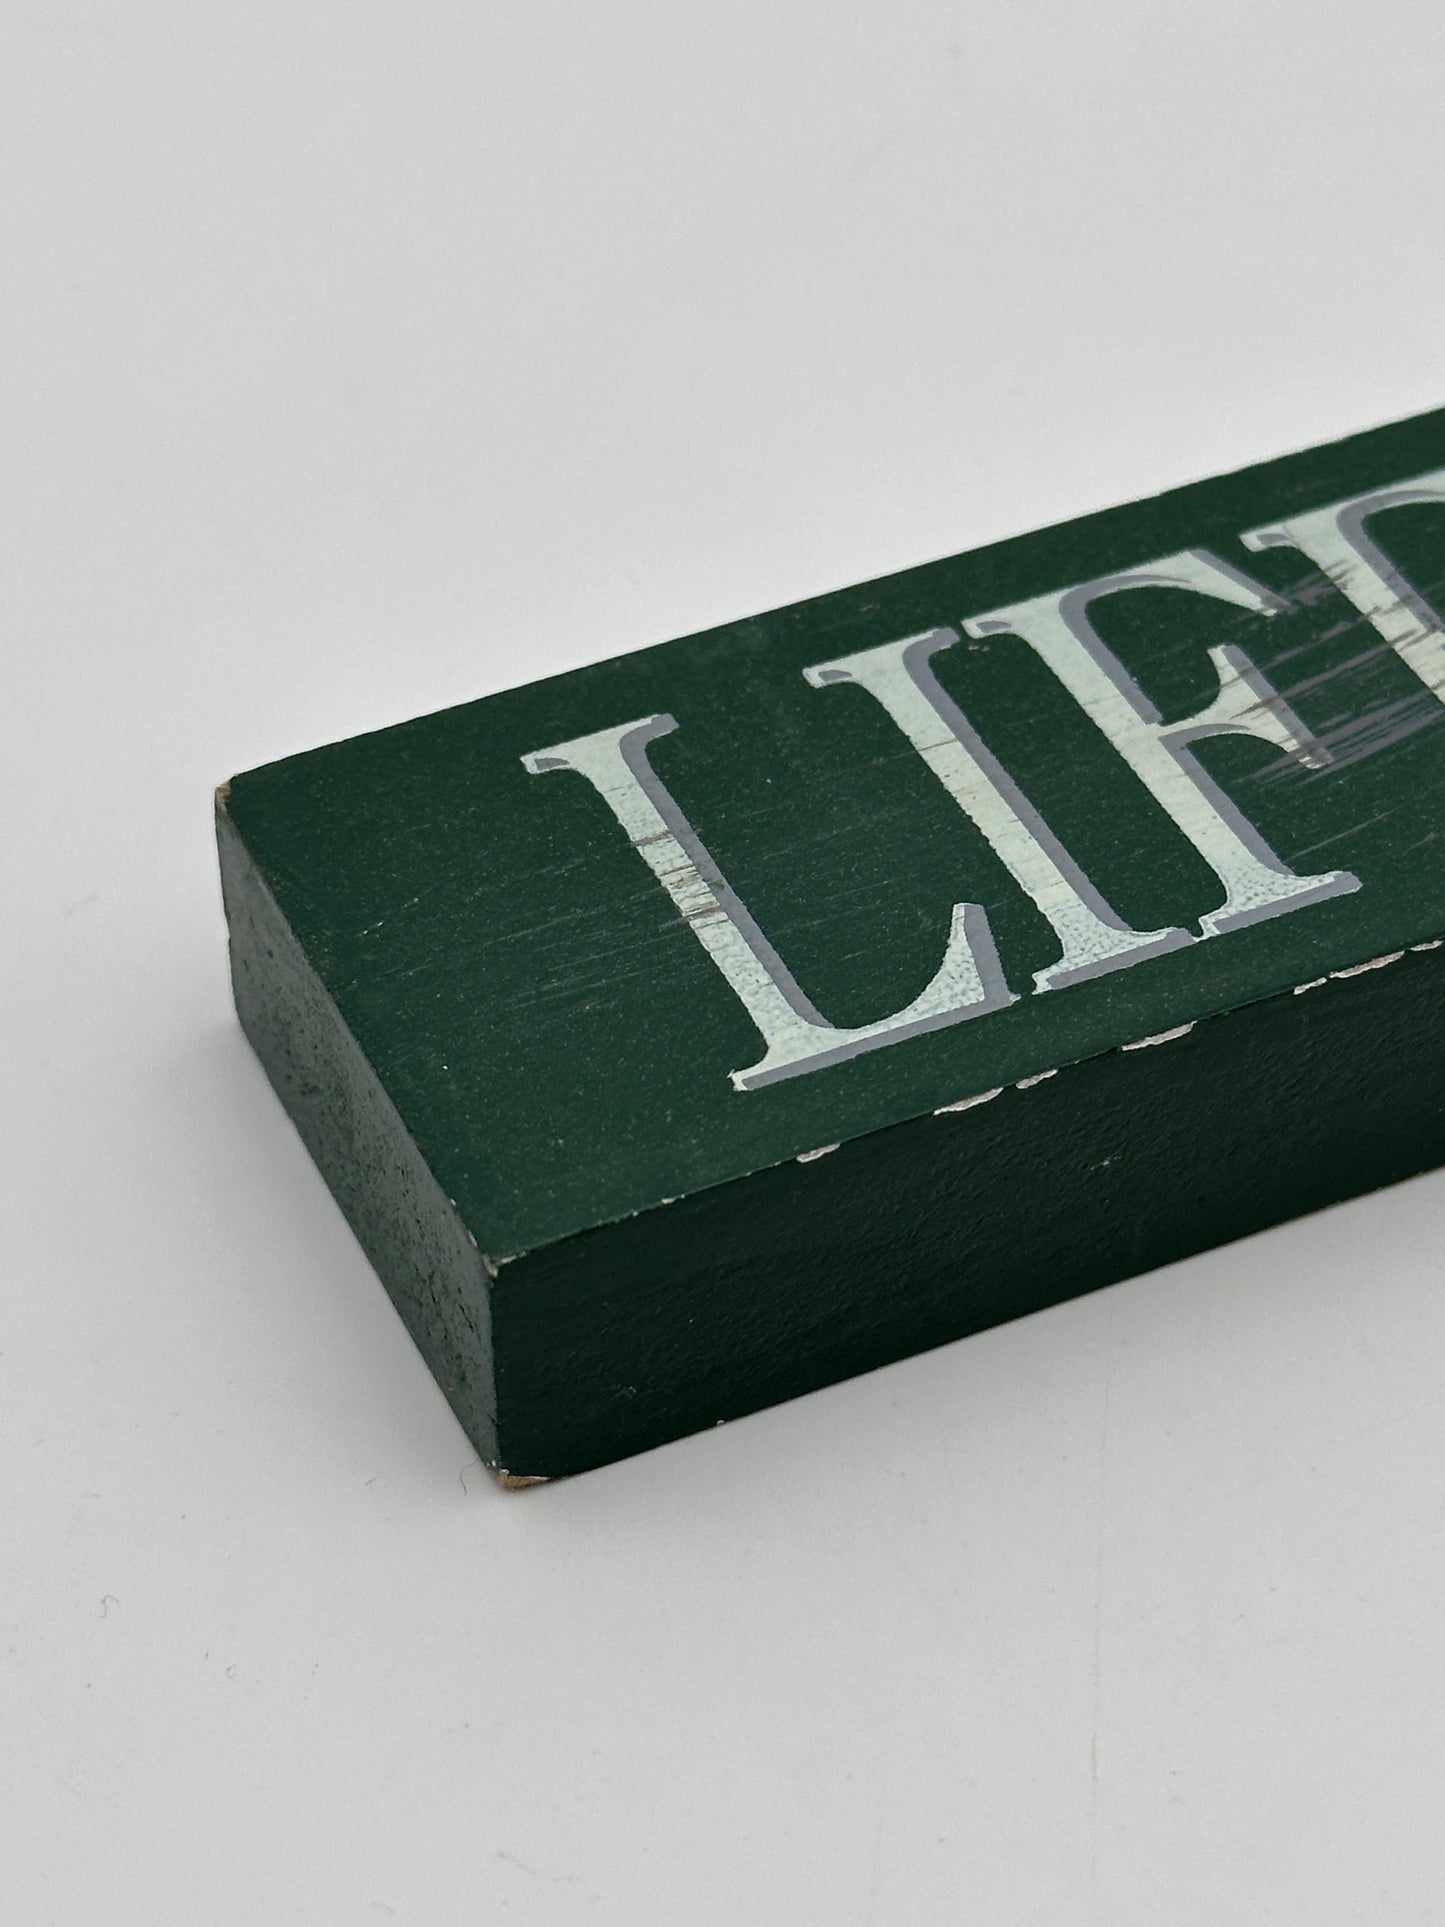 Chesapeake Bay Green Decorative Plaque "Life's Better on the Boat"